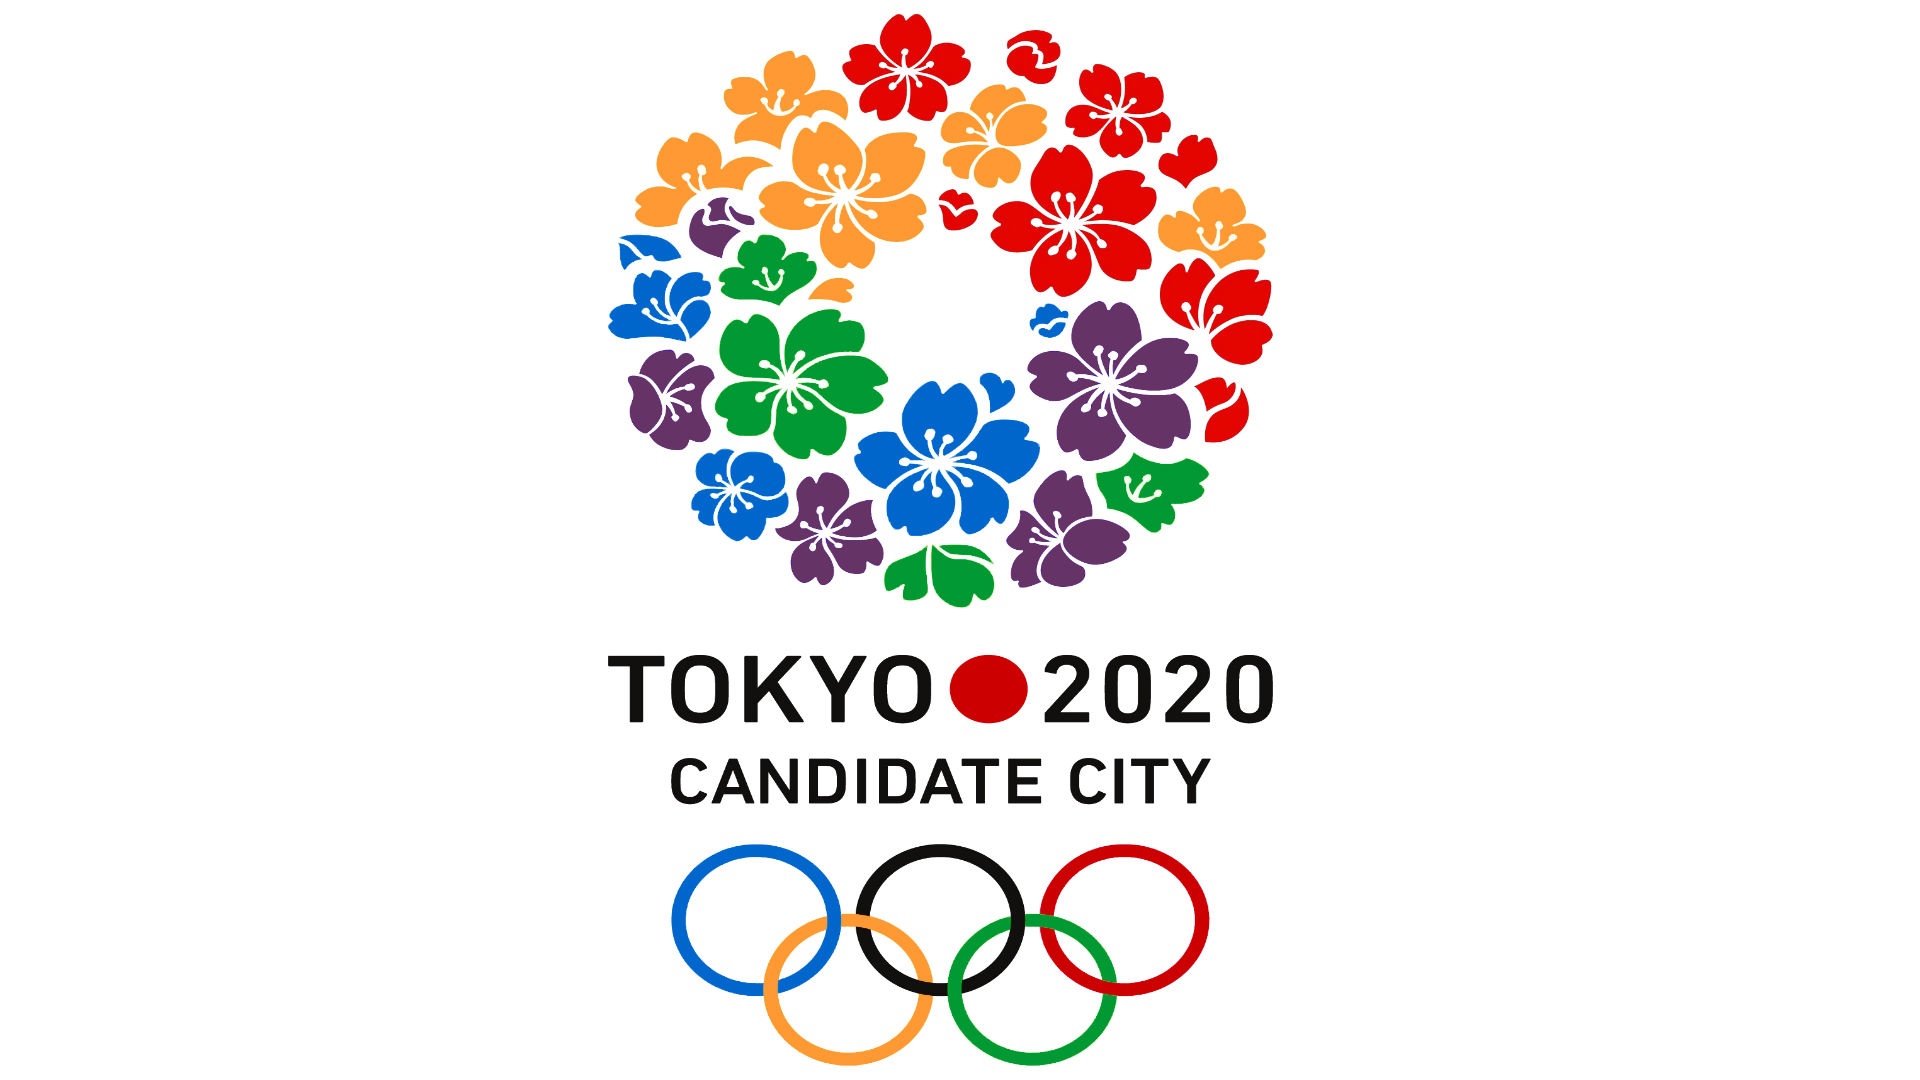 Tokyo Candidate City 2020 Olympics